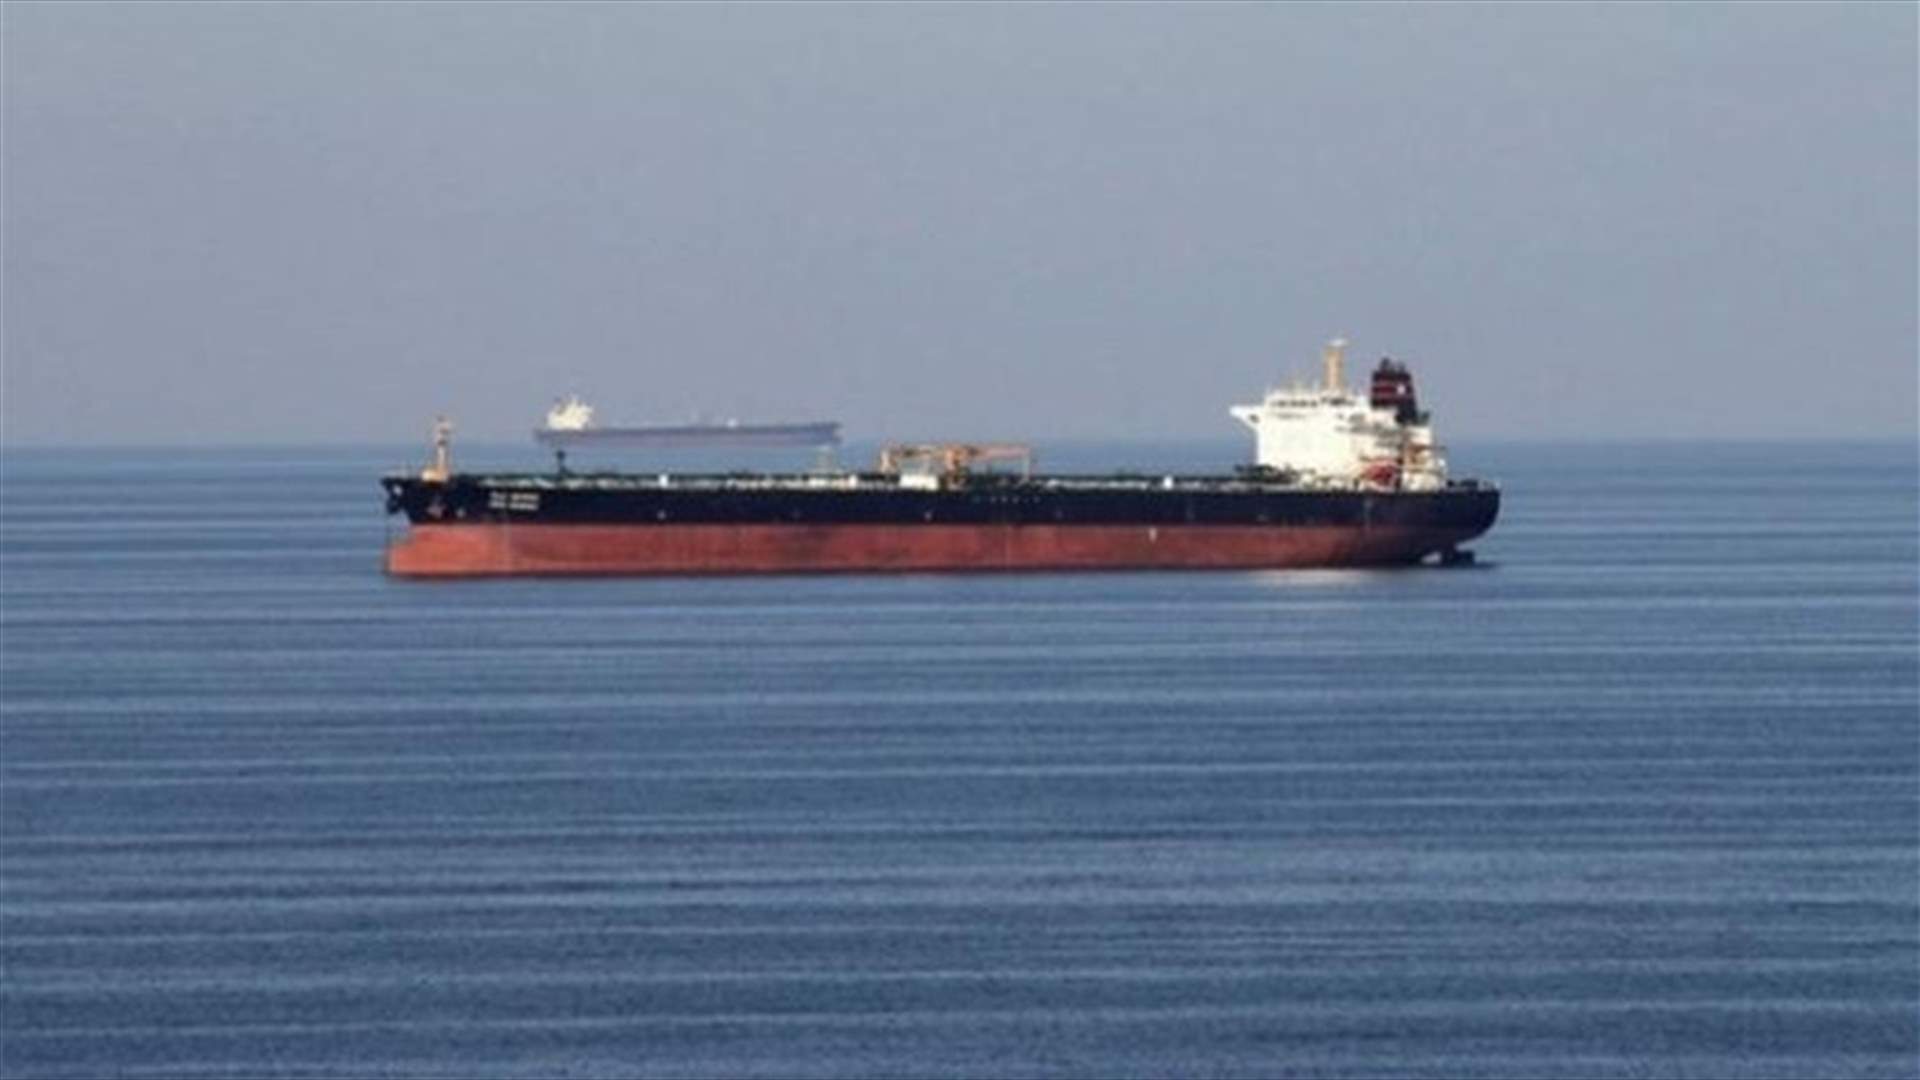 TankerTrackers says third tanker carrying fuel to Lebanon underway